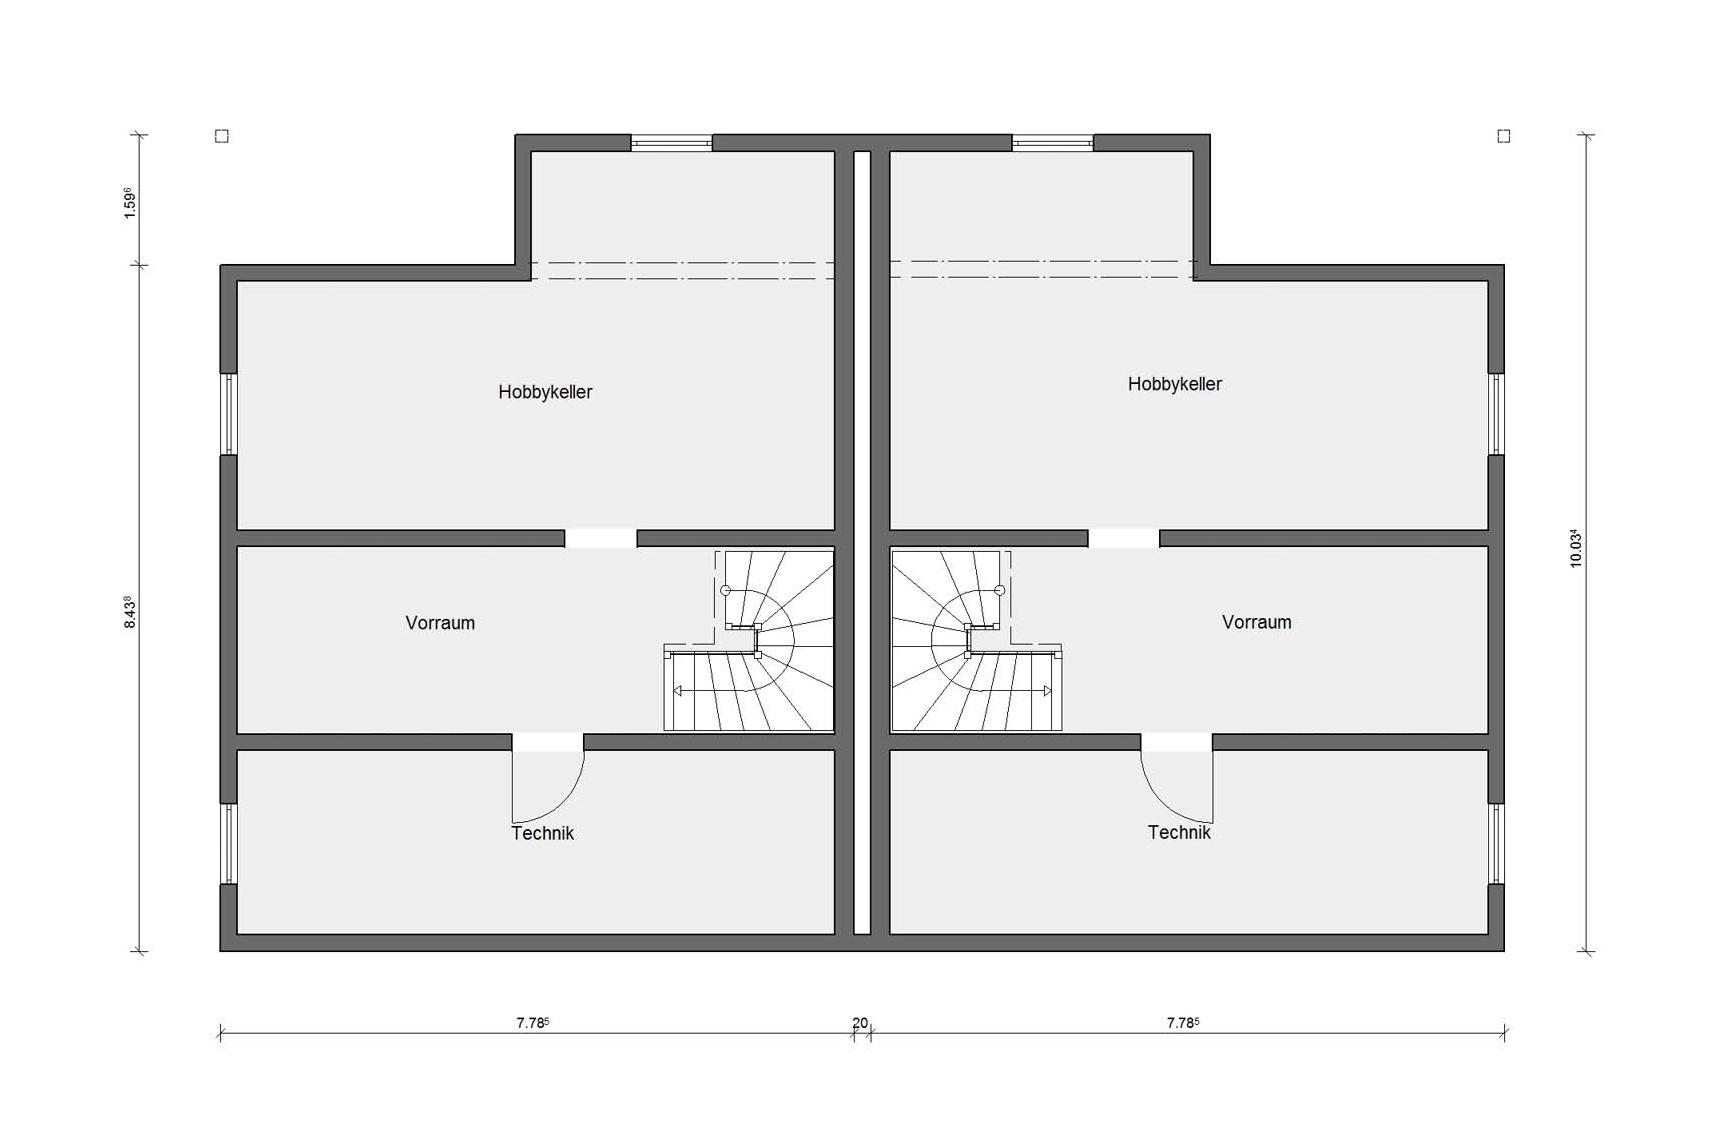 Basement floor plan semi-detached house with covered patio